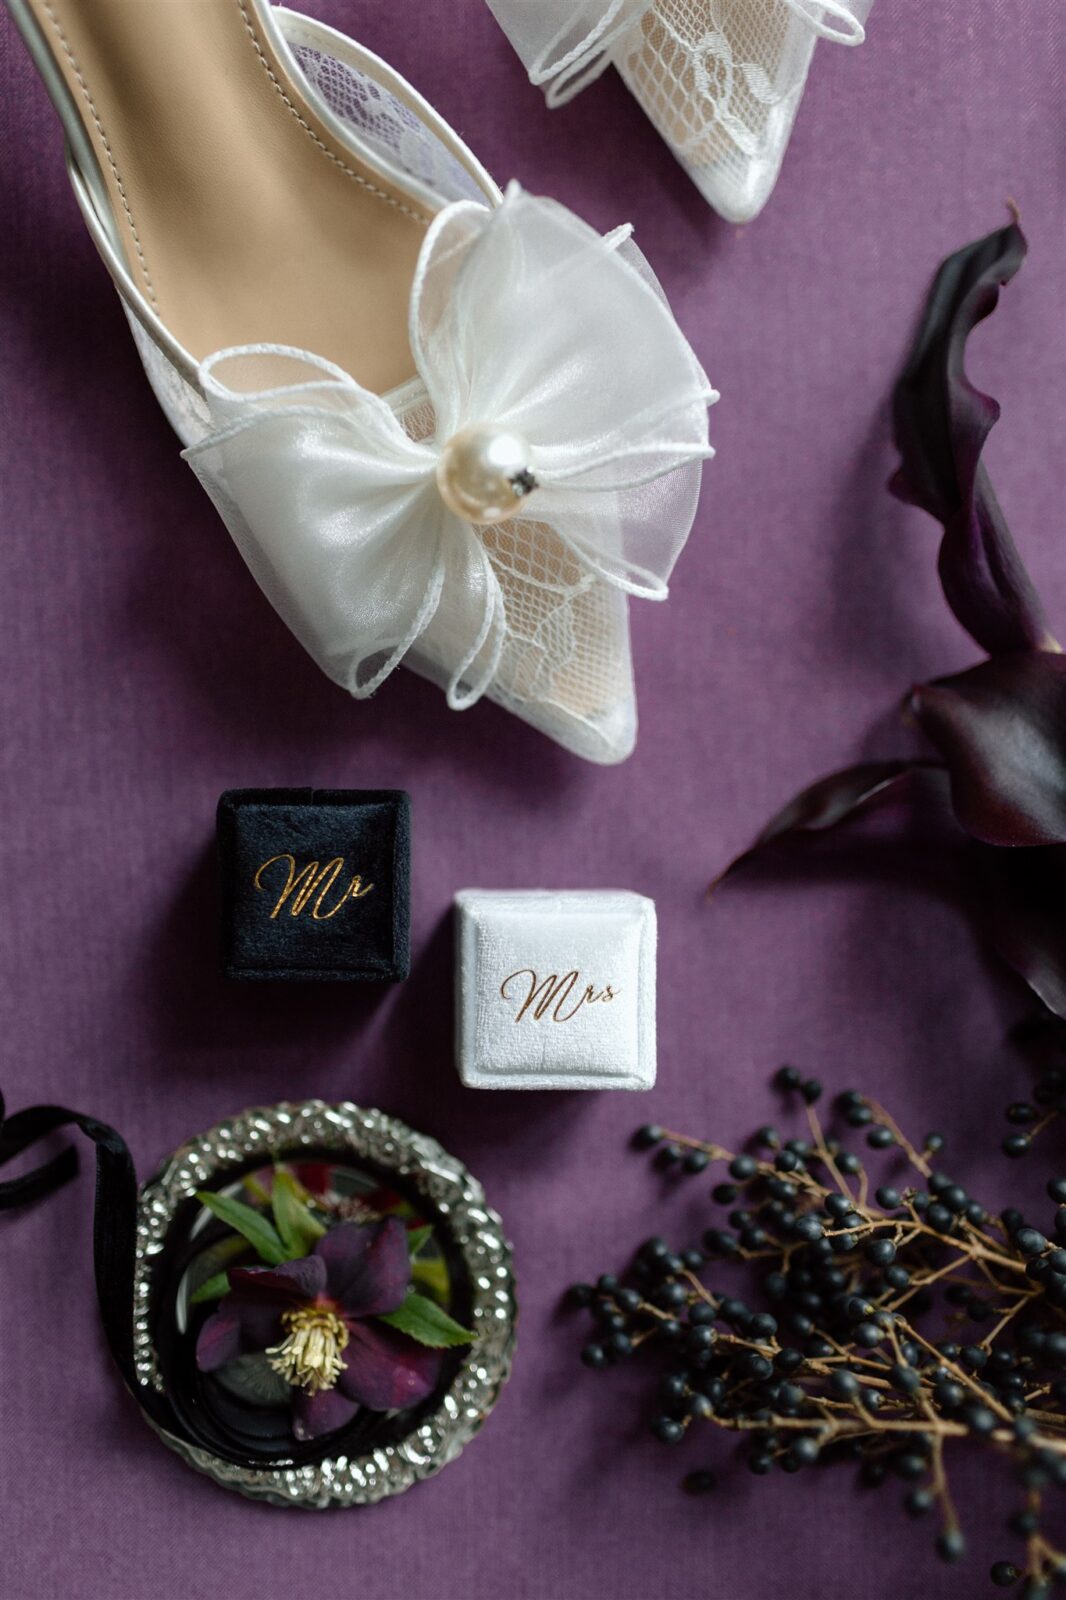 Plum inspired wedding details, featuring shoes by lace bridal shoes with pearl and cow, captured by Bronte Taylor Photography.